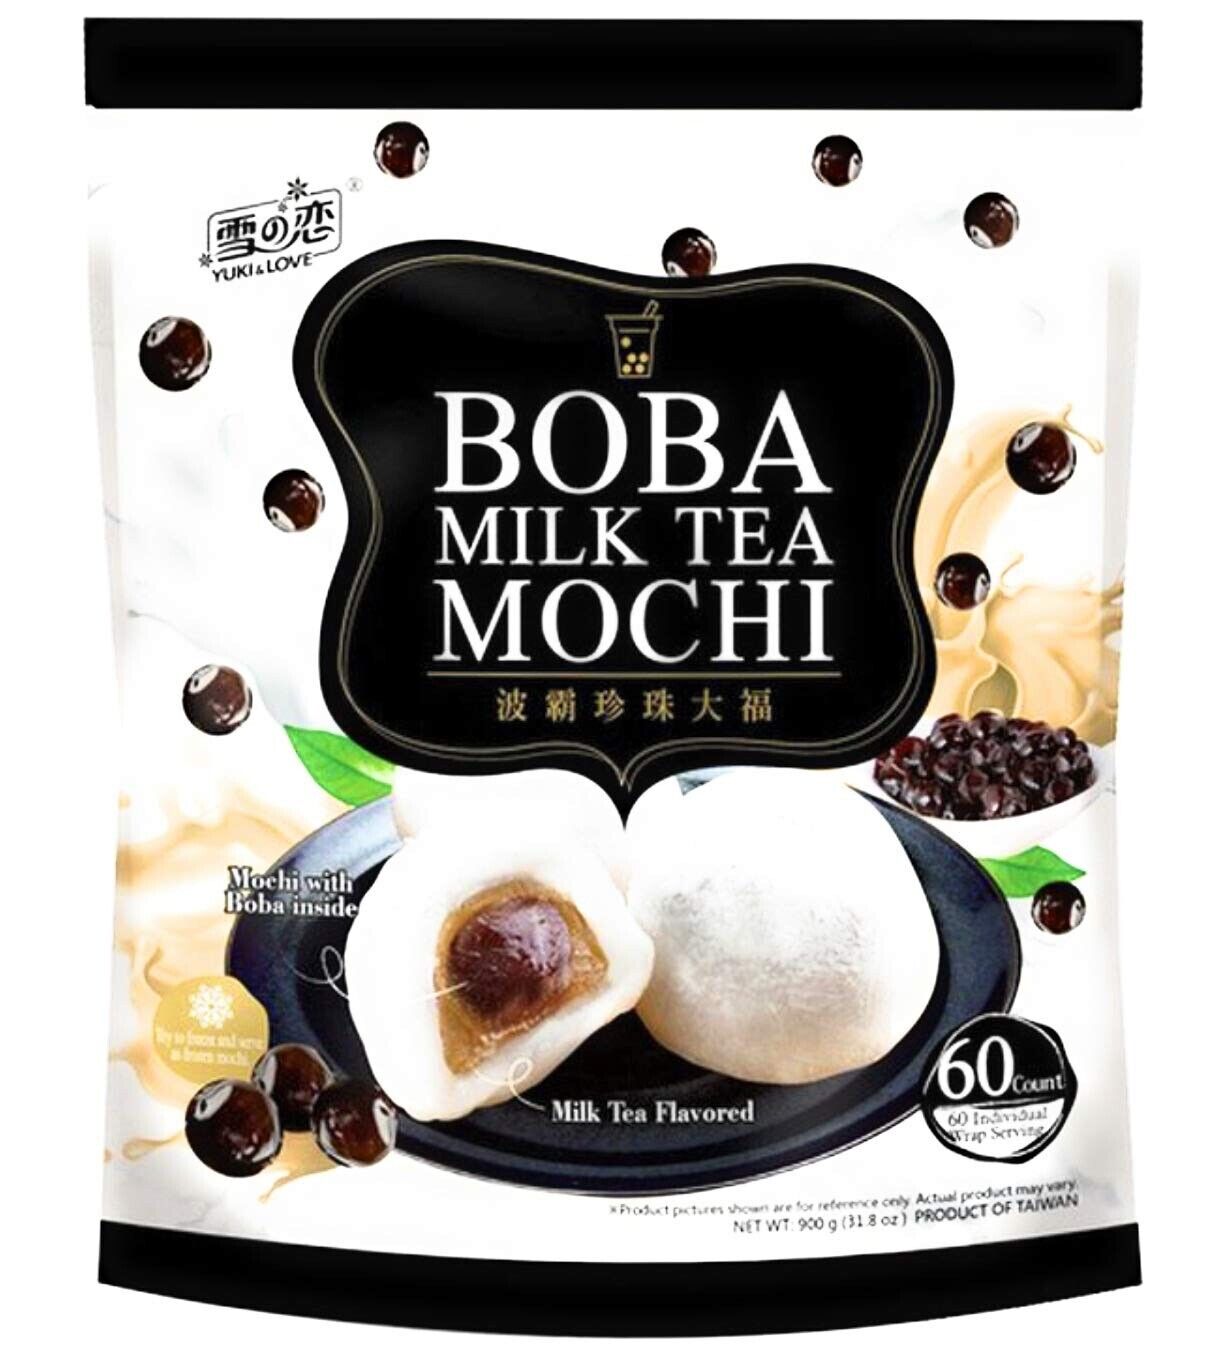 Yuki and Love Boba Milk Tea 60 Oz Pac Count Challenge Limited time sale the lowest price of Japan Mochi